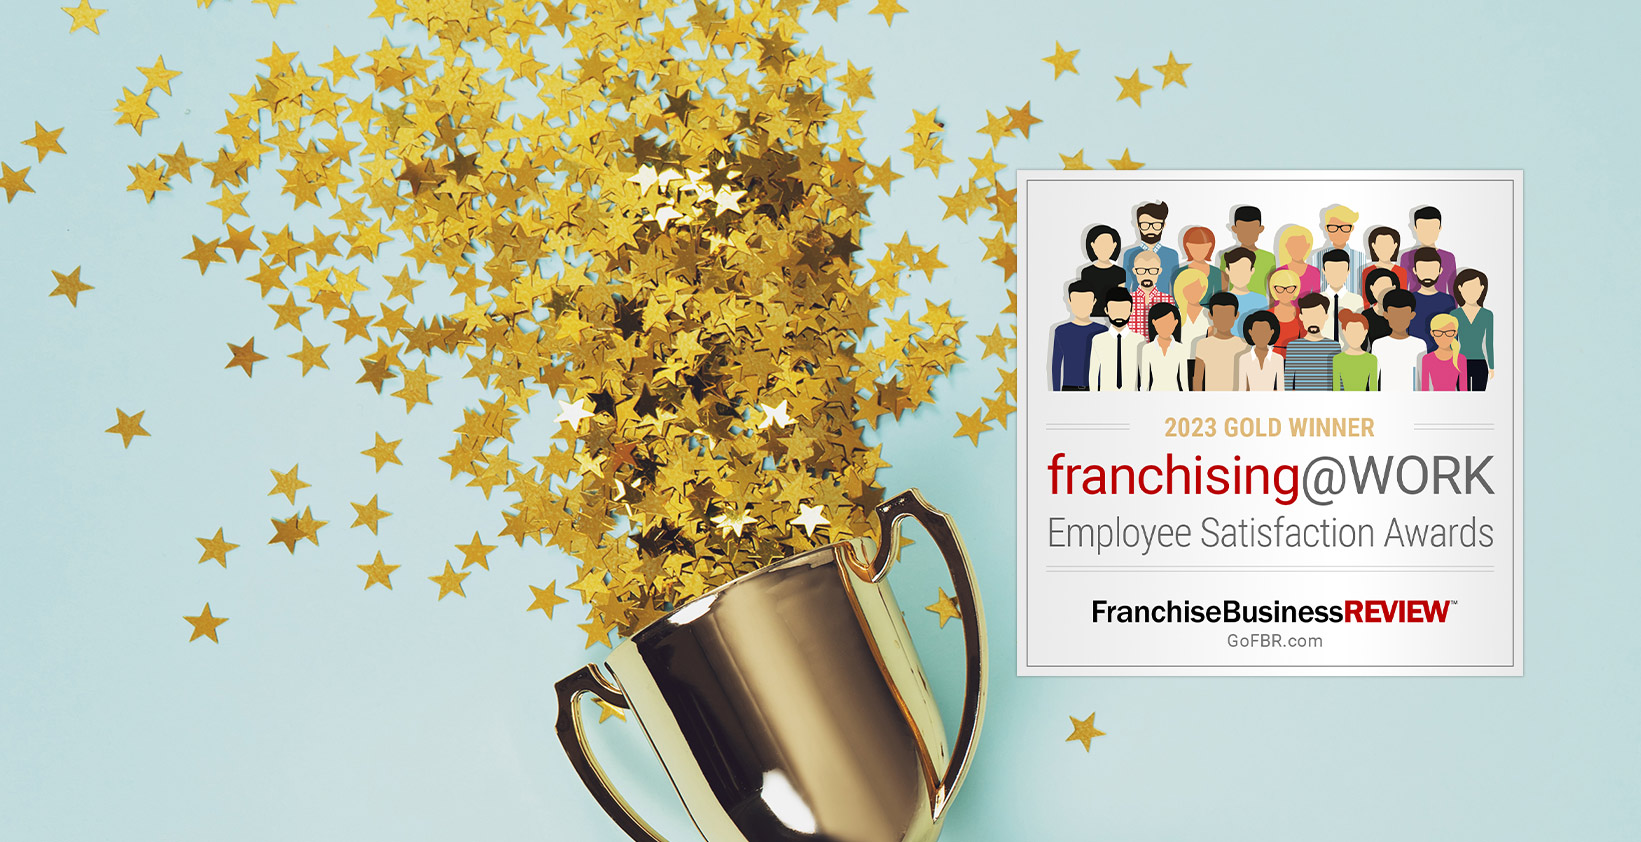 2023 franchising at work badge from the employee satisfaction awards next to a trophy star confetti